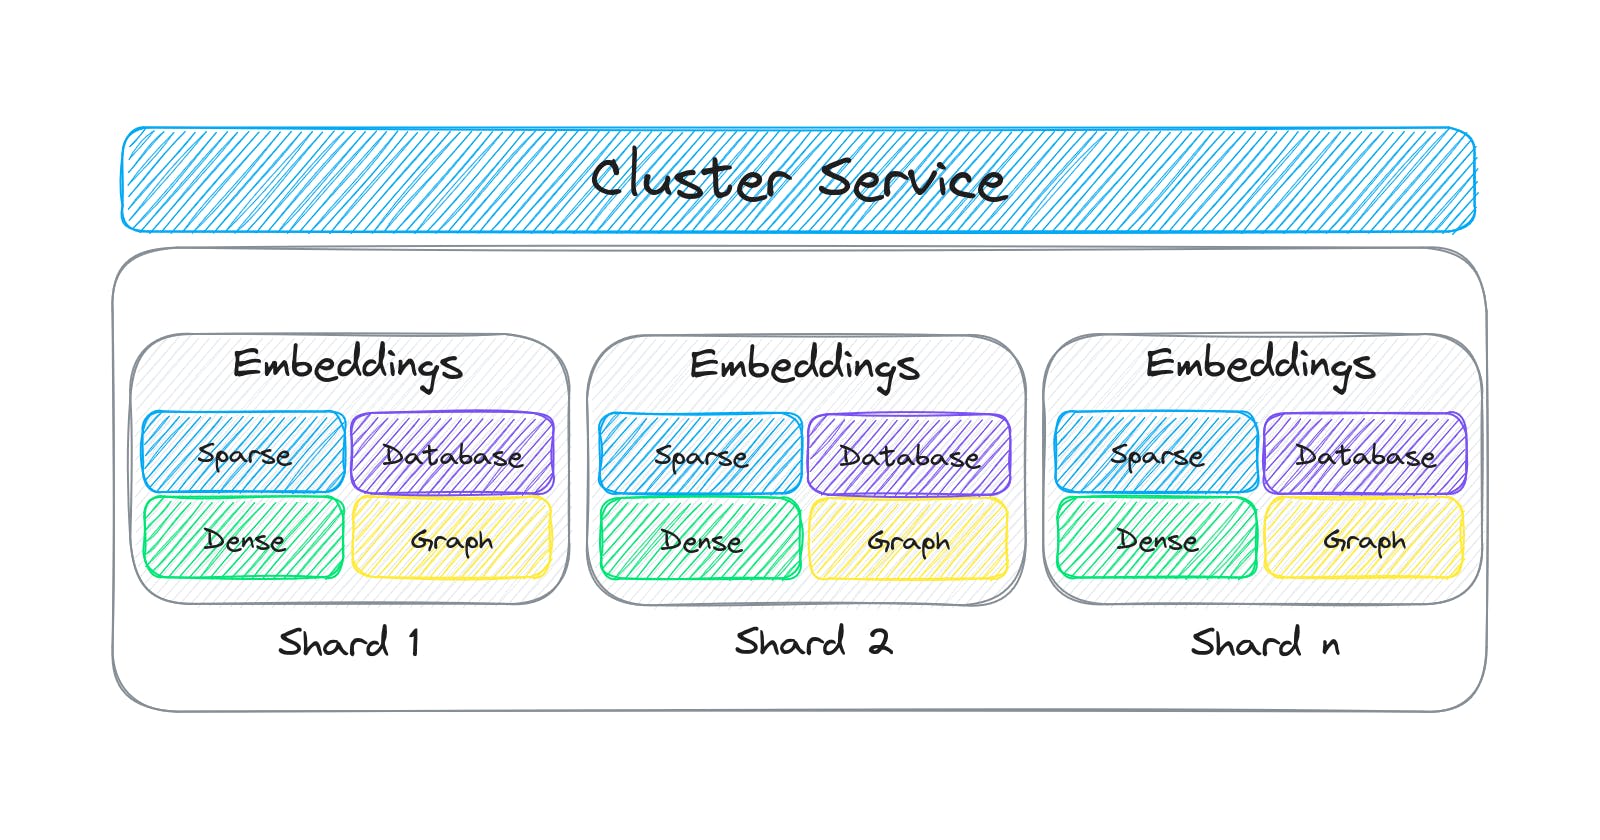 Distributed embeddings cluster